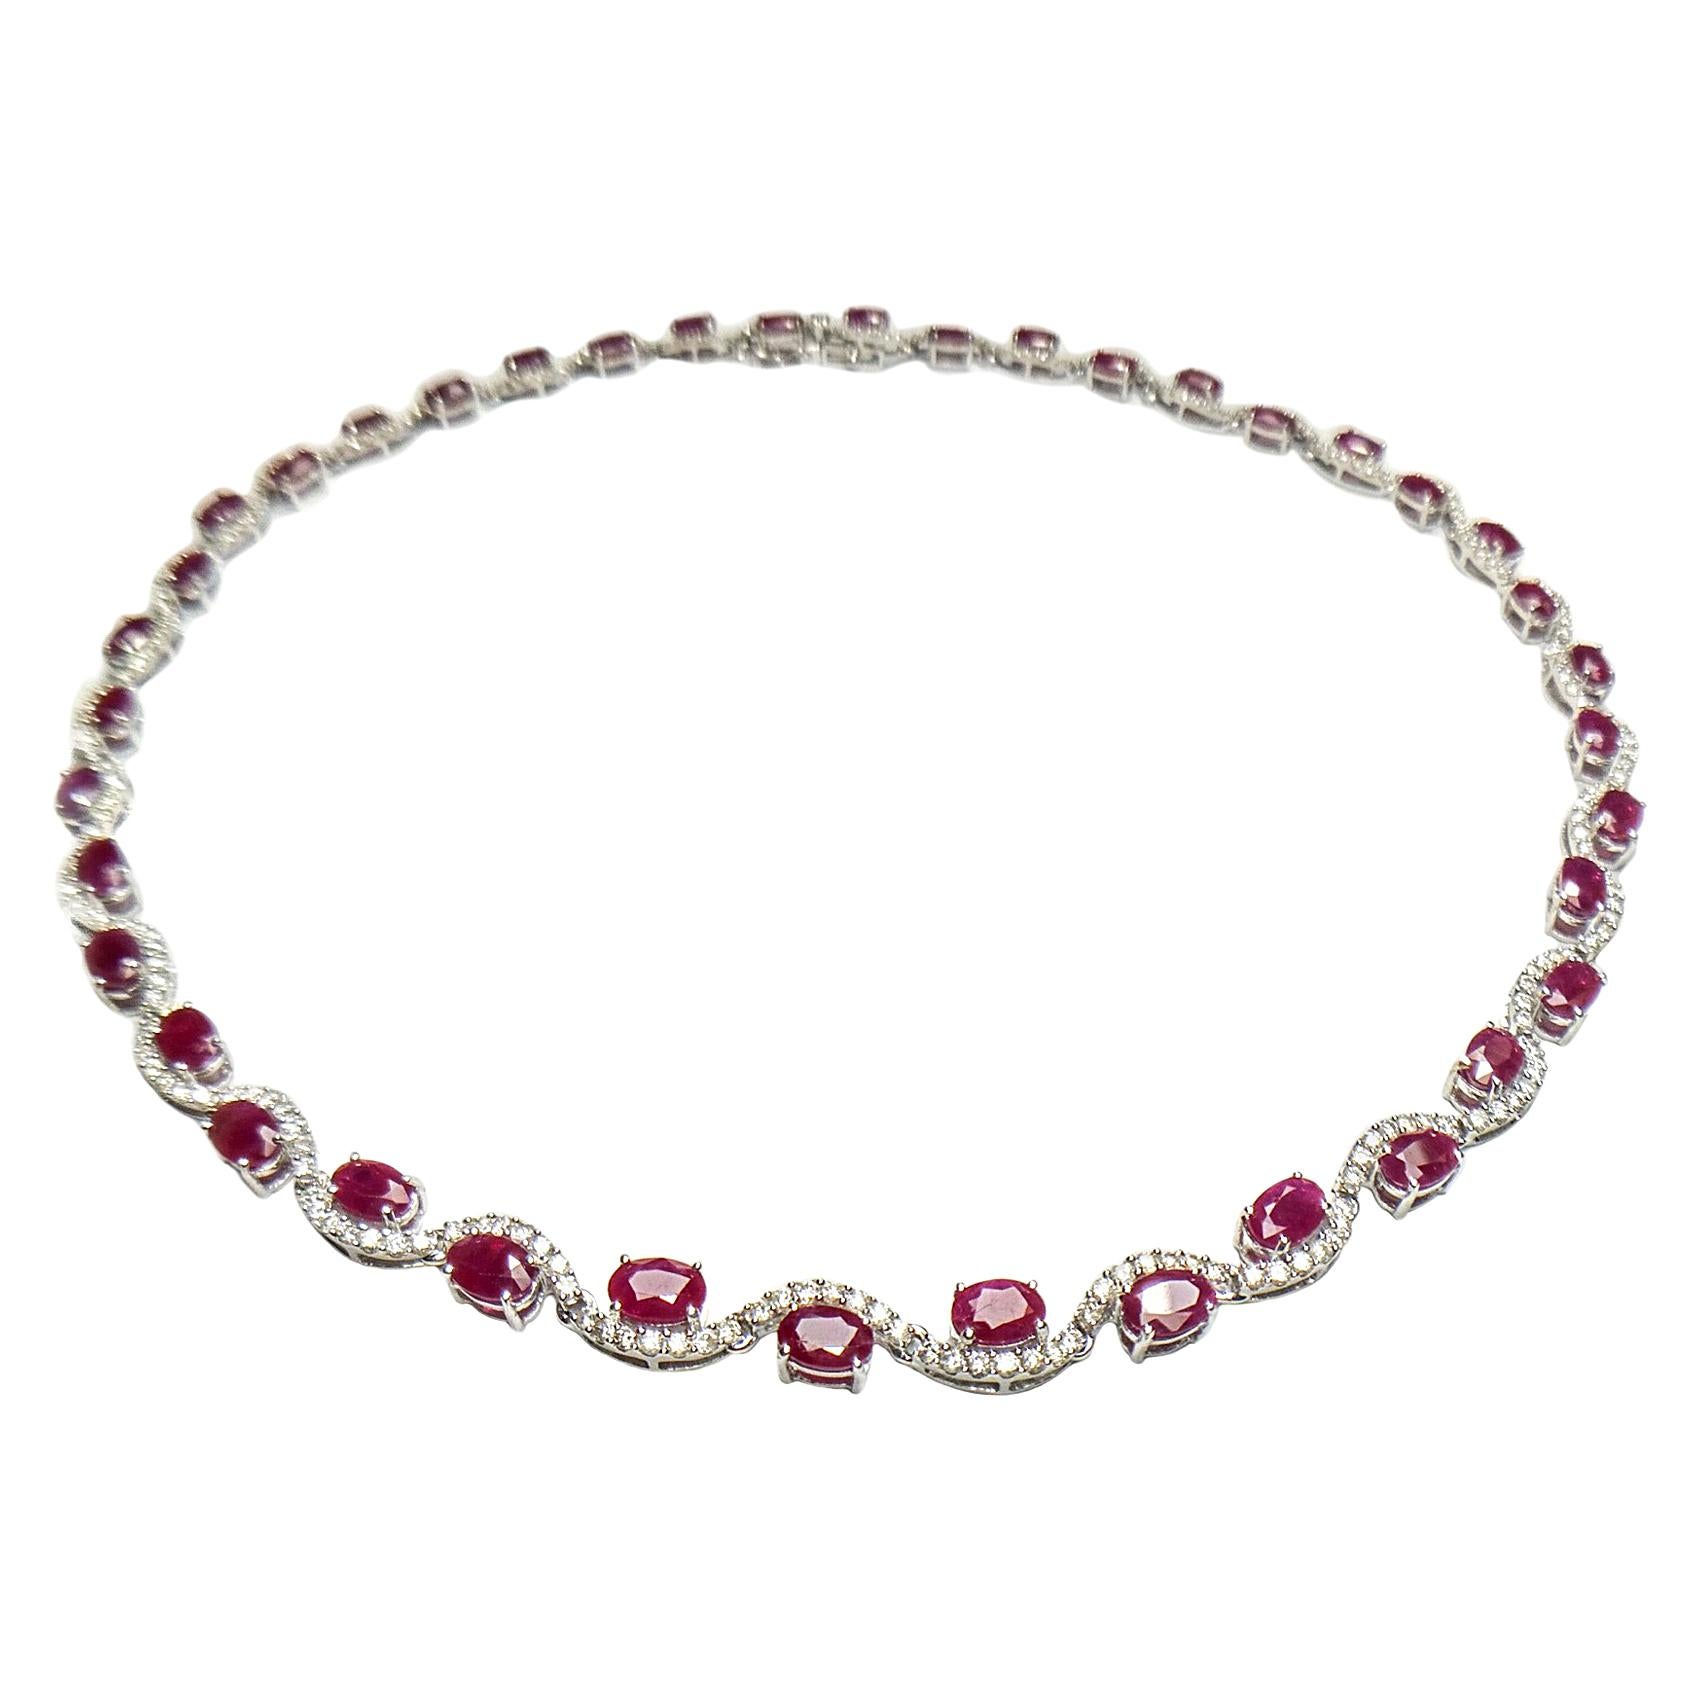 Red oval ruby and diamond necklace. Beautiful handcrafted swirl design necklace, accented with lively red oval natural rubies encased in open mount set in 4 prongs with round brilliant cut diamonds, assembled in 14 karats white gold with hinged